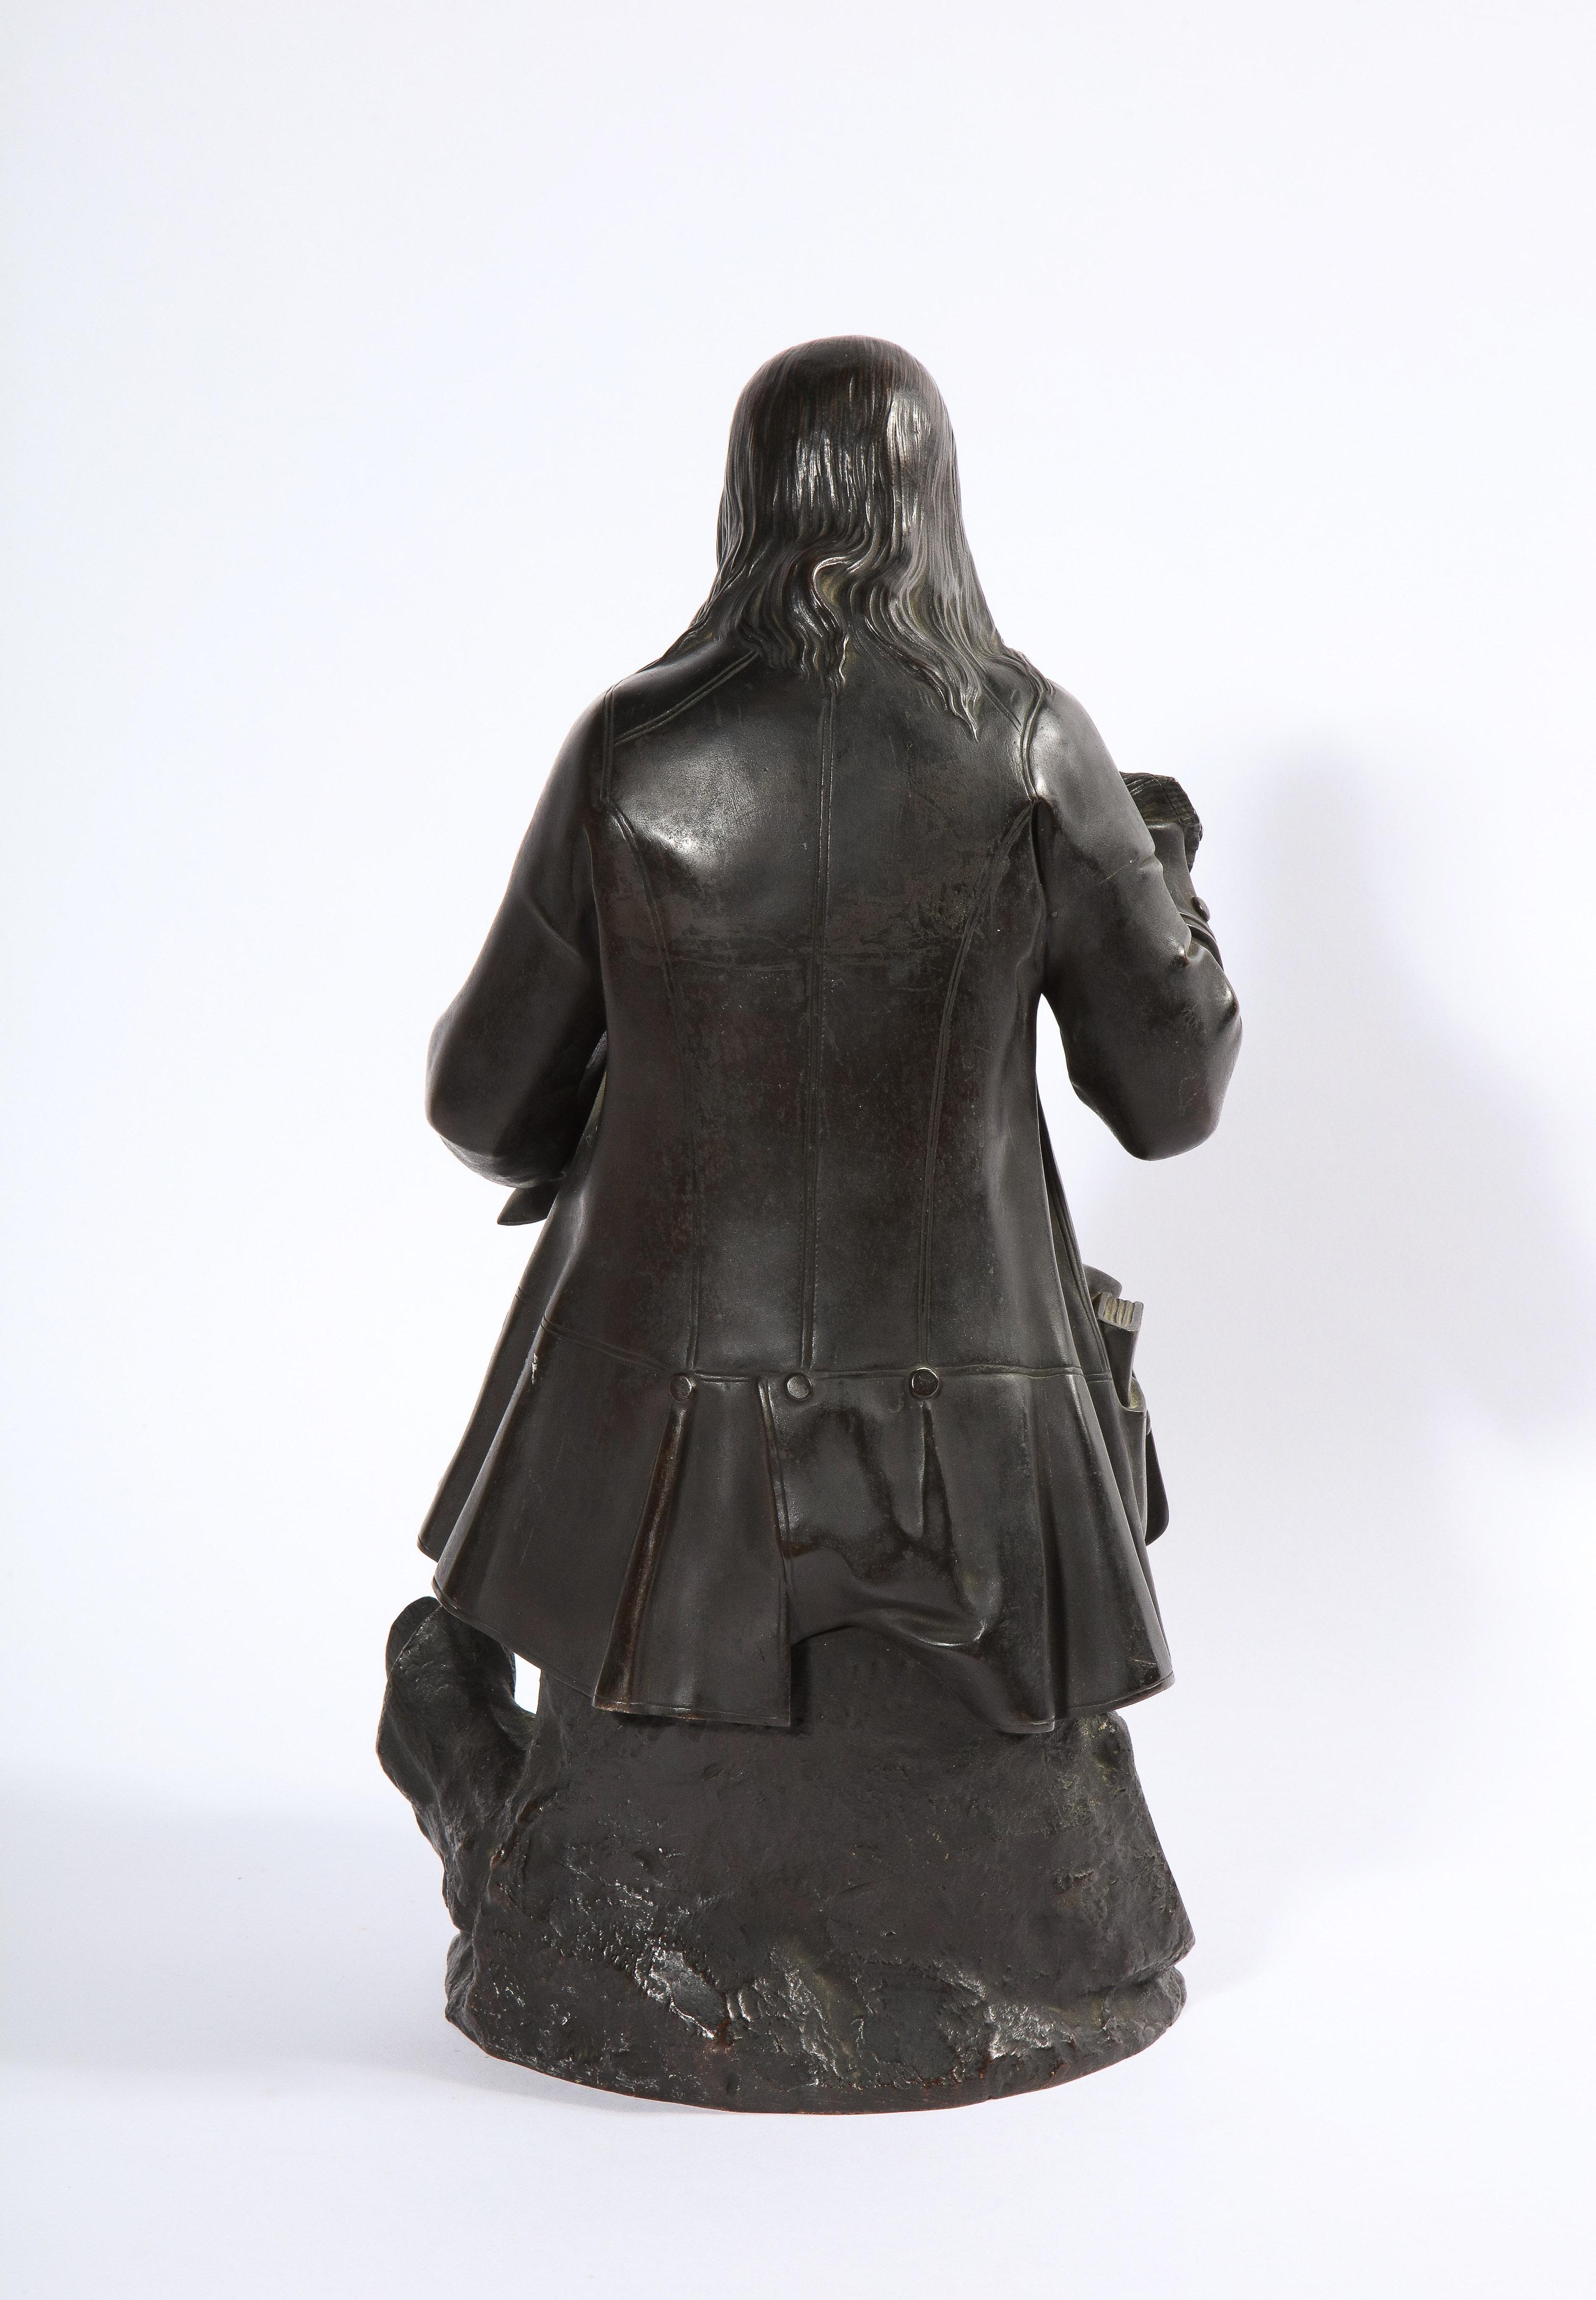 Rare Patinated Bronze Sculpture of Benjamin Franklin, by A. Carrier-Belleuse For Sale 4